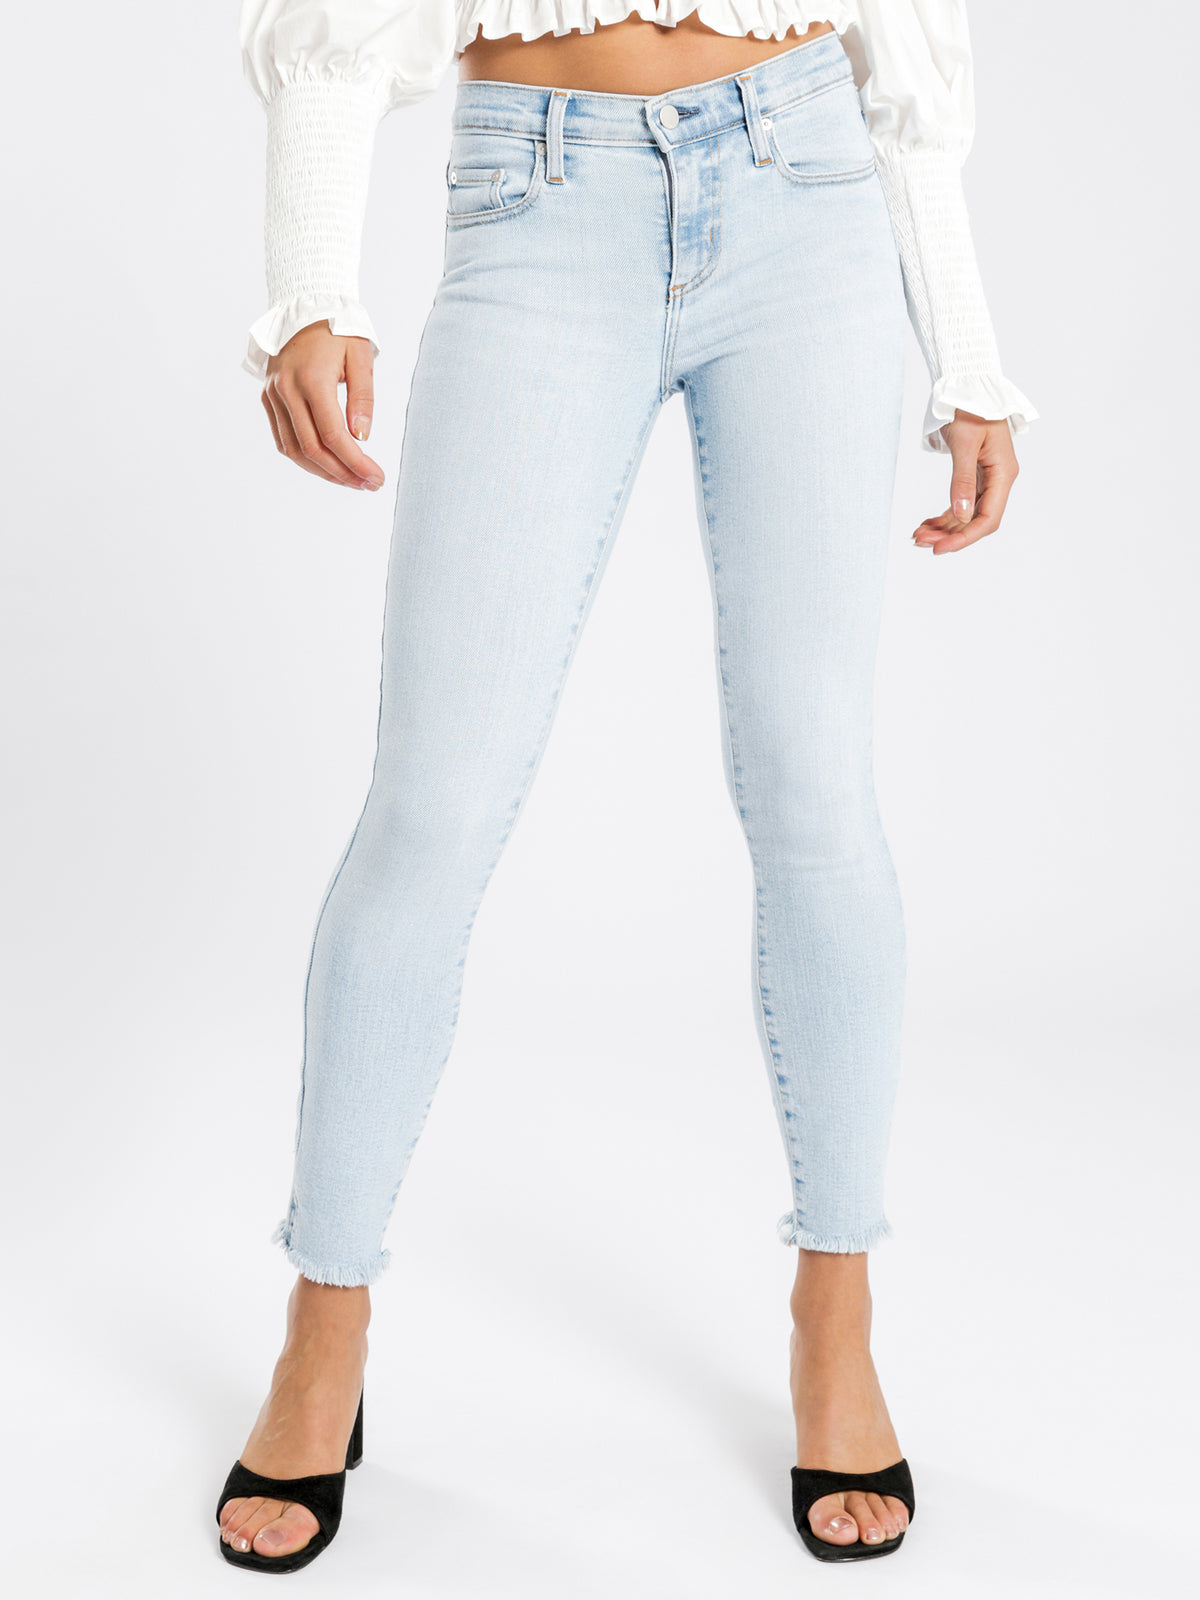 Geo Mid-Rise Skinny Ankle Jeans in Light Authentic Blue Denim